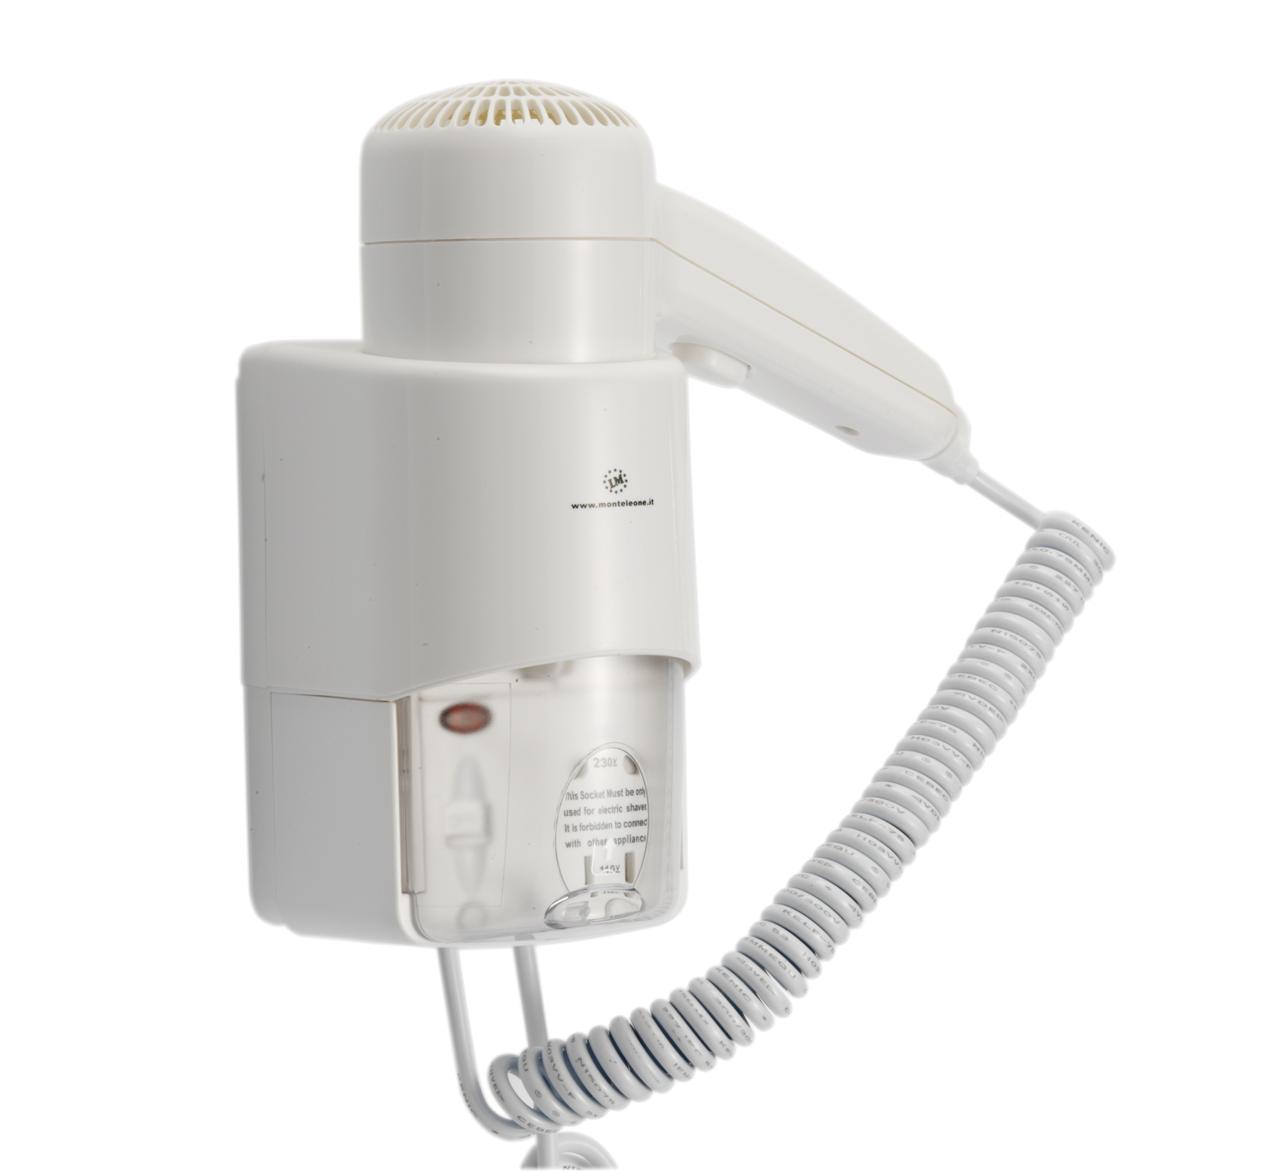 Wall-mounted hair dryer  with shaver socket